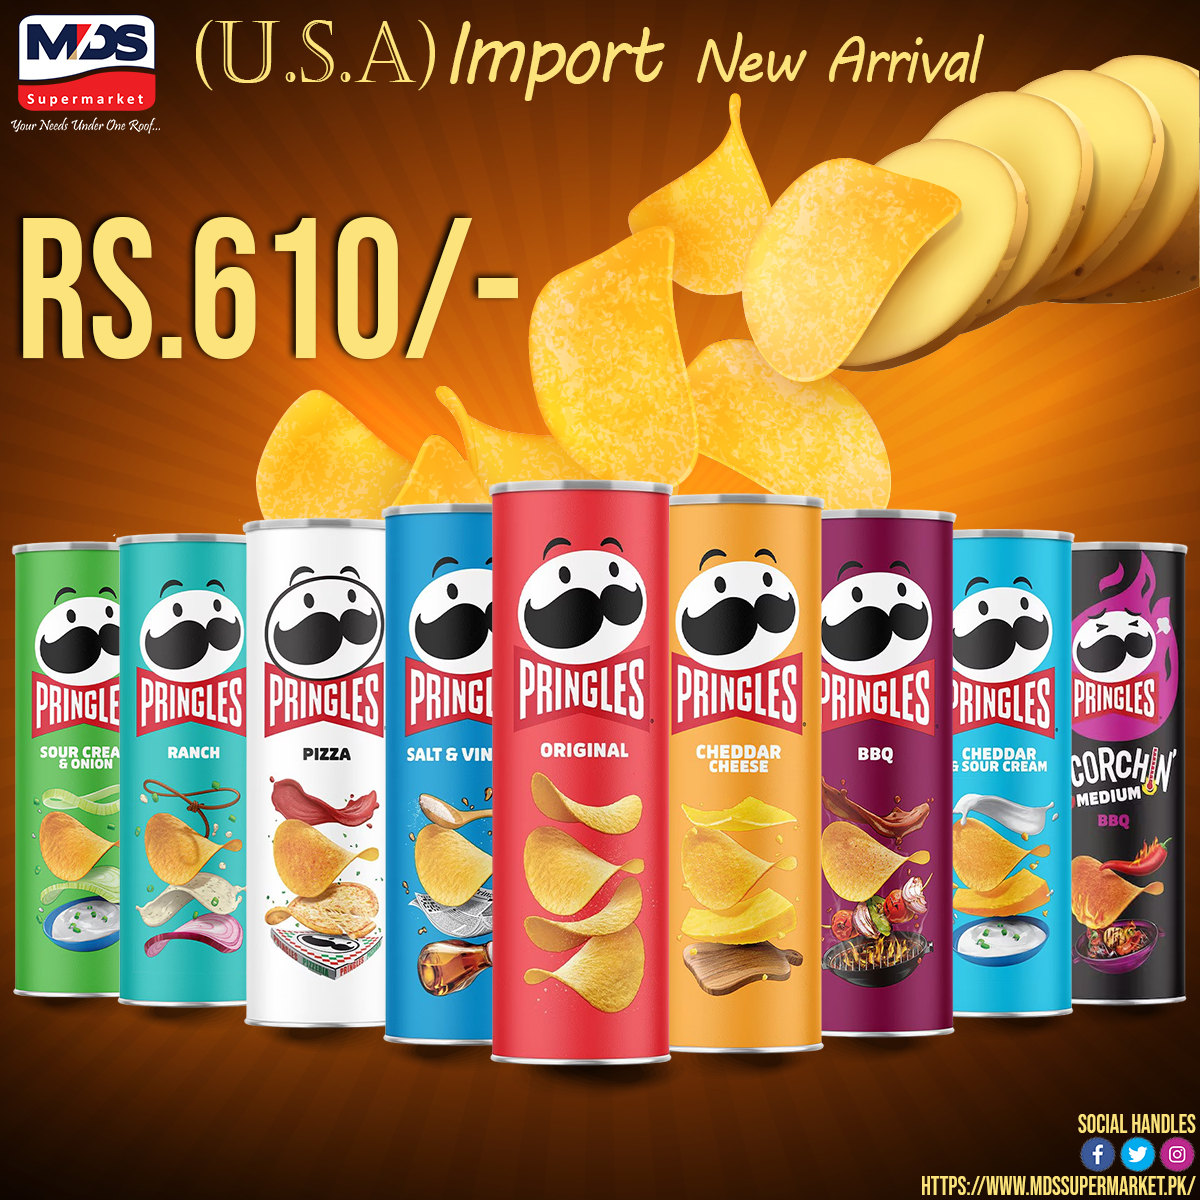 Get ready to snack in style with the arrival of Pringles USA at MDS Supermarket! 🇺🇸 
Find us at:
📍 Branch 1: Toghi Road, Quetta. Phone: (081-2823444)
📍 Branch 2: Quarry Road, Quetta. Phone: (081-2823420)

#NewArrival #PringlesUSA #SnackTime #ImportedGoods #MDSupermarket #Quetta